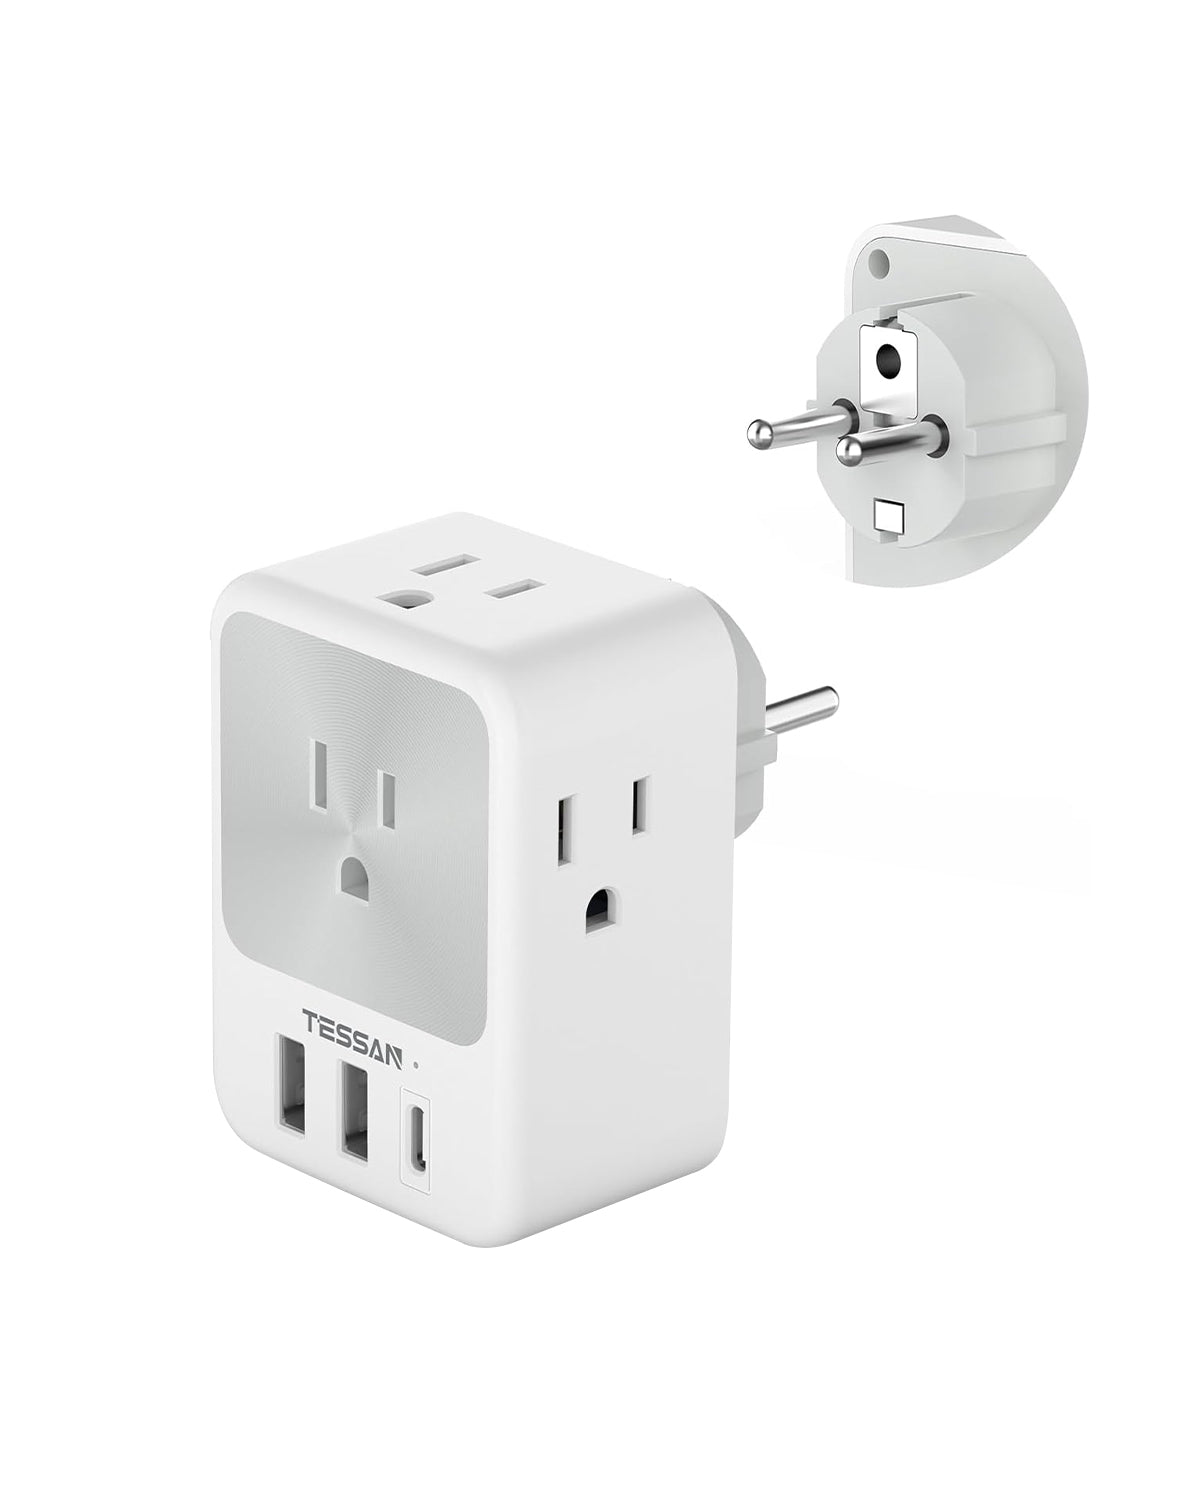 TESSAN Germany France Travel Power Adapter, Schuko Plug Adaptor with 4 Outlets 3 USB Charger (1 USB C Port)